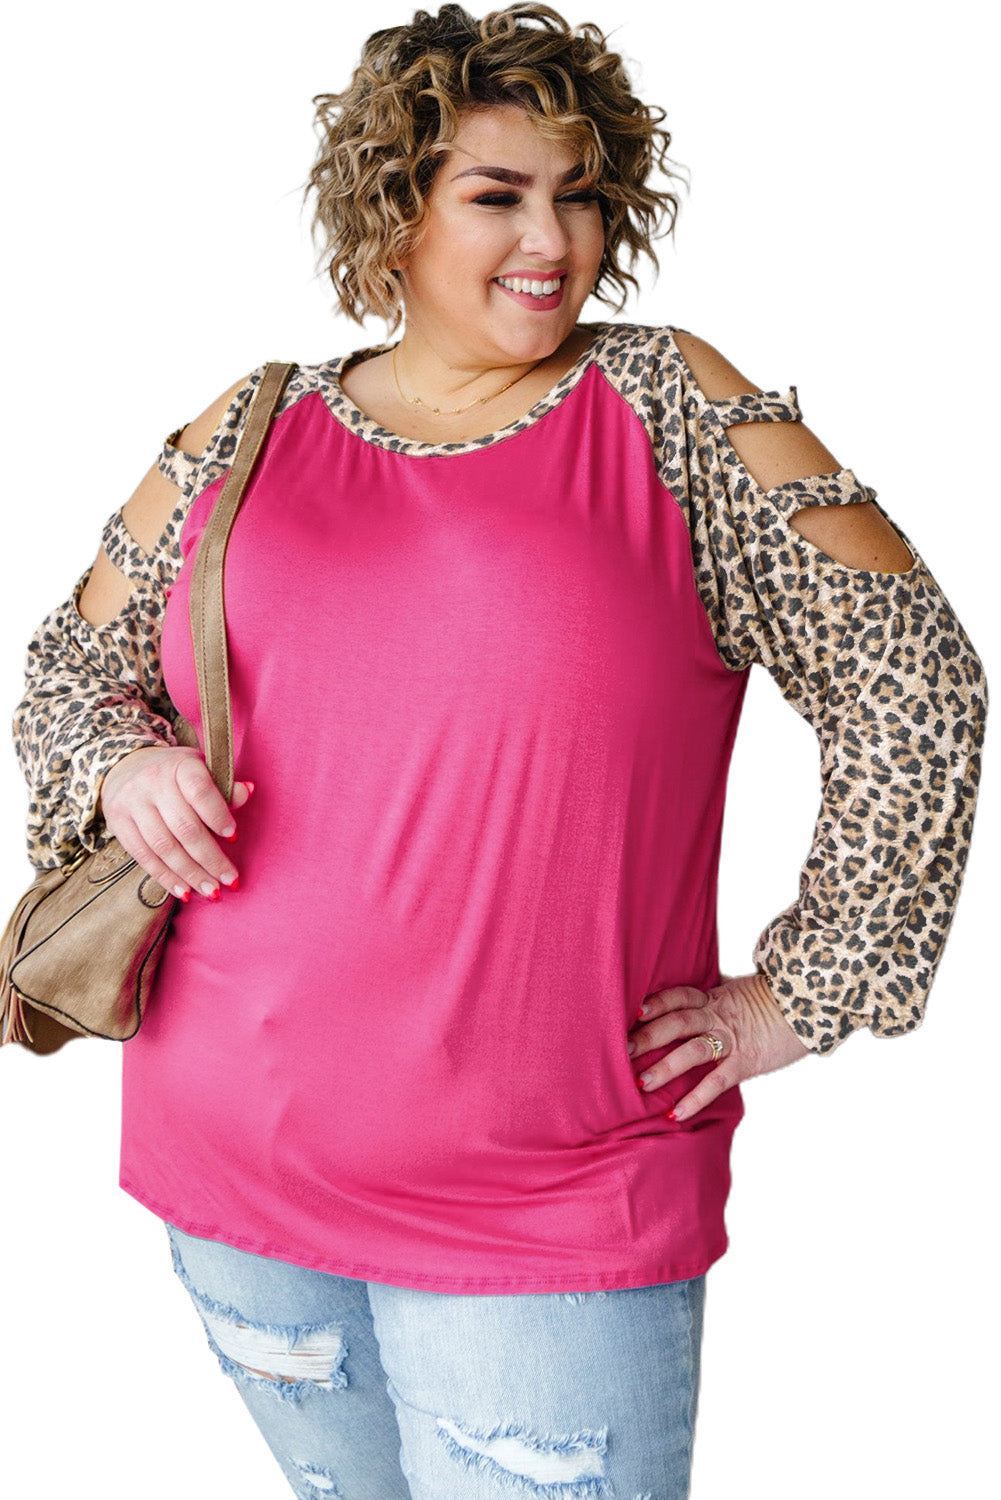 Rose Plus Size Ladder Hollow-out Cheetah Sleeve Top Plus Size Tops JT's Designer Fashion